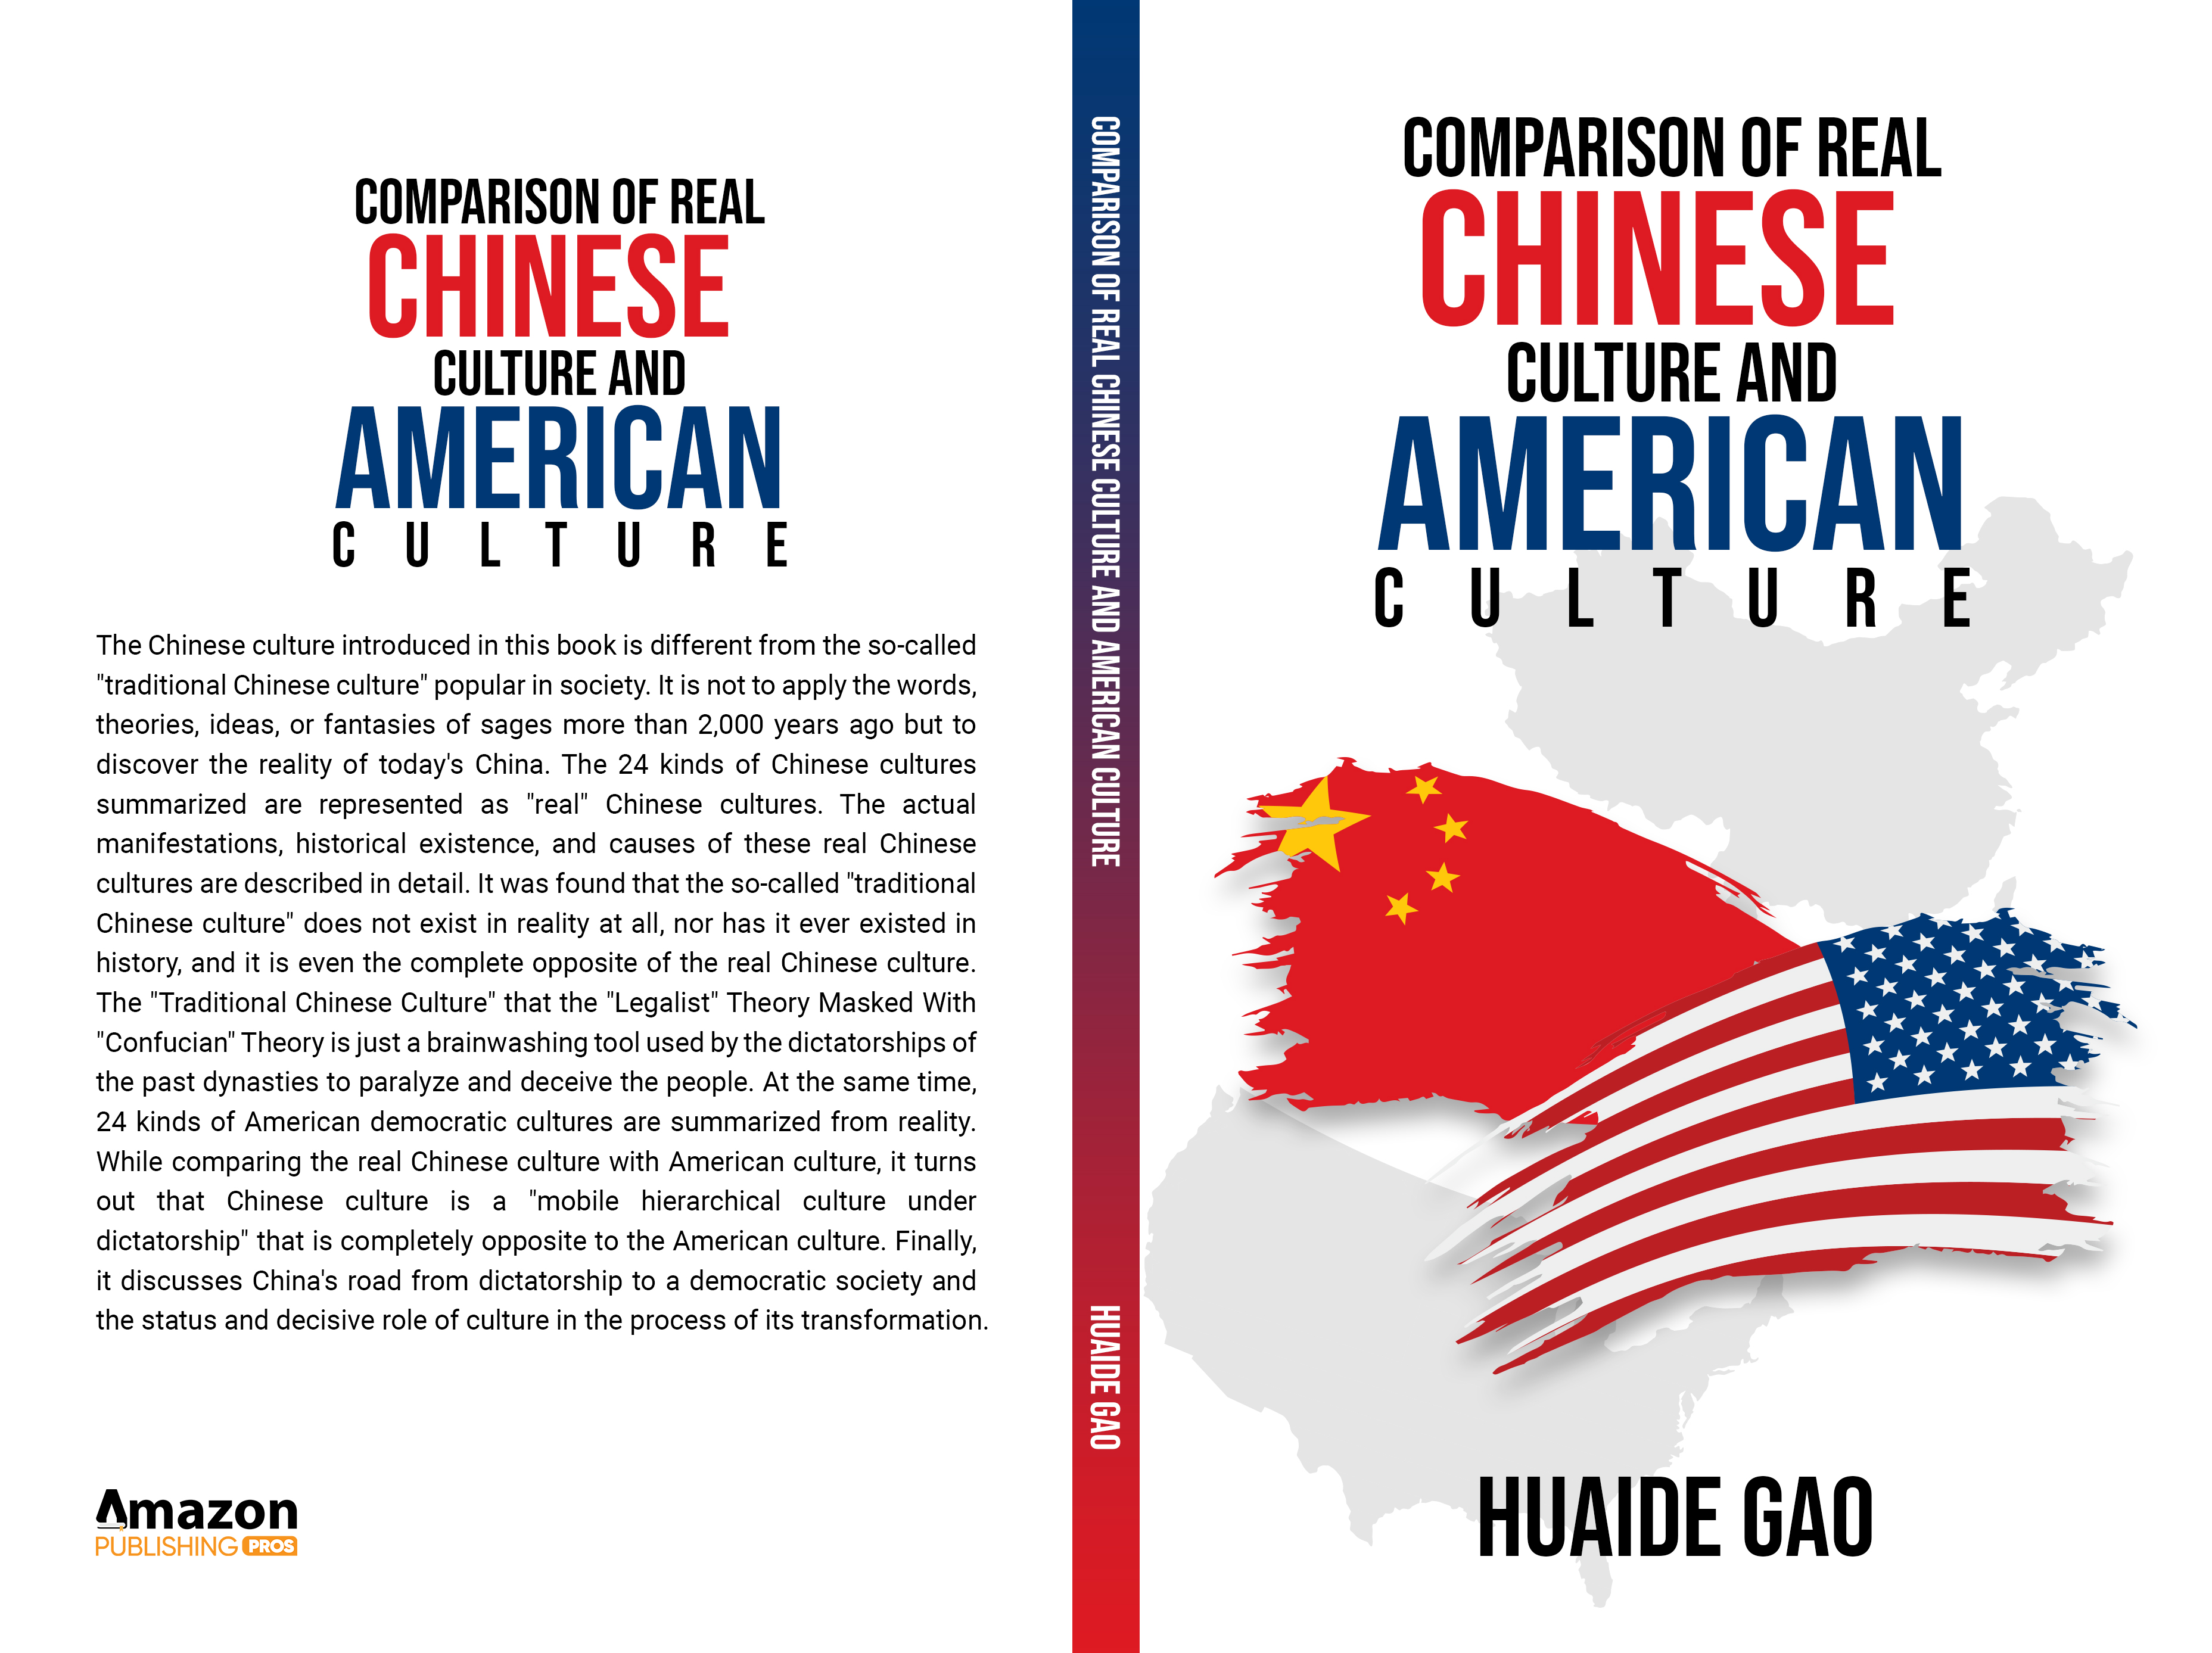 Huaidi Gao Compares The Chinese Culture With The American Culture